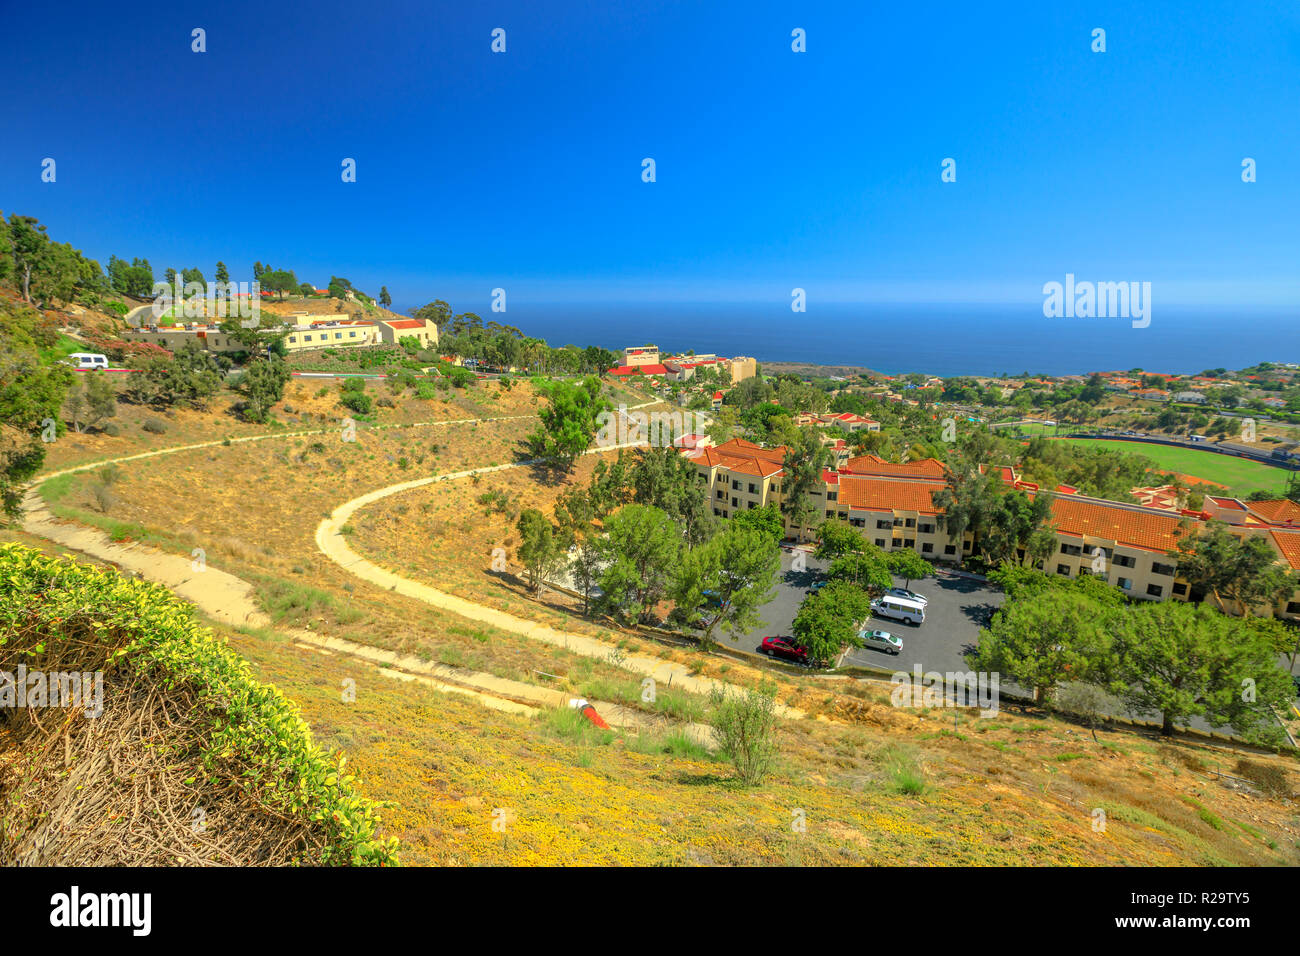 Scenic landscape of Pacific Coast in California. Panoramic aerial view of Pepperdine University, an American university in Malibu, Unites States. The campus on the hills overlooking the Pacific Ocean. Stock Photo